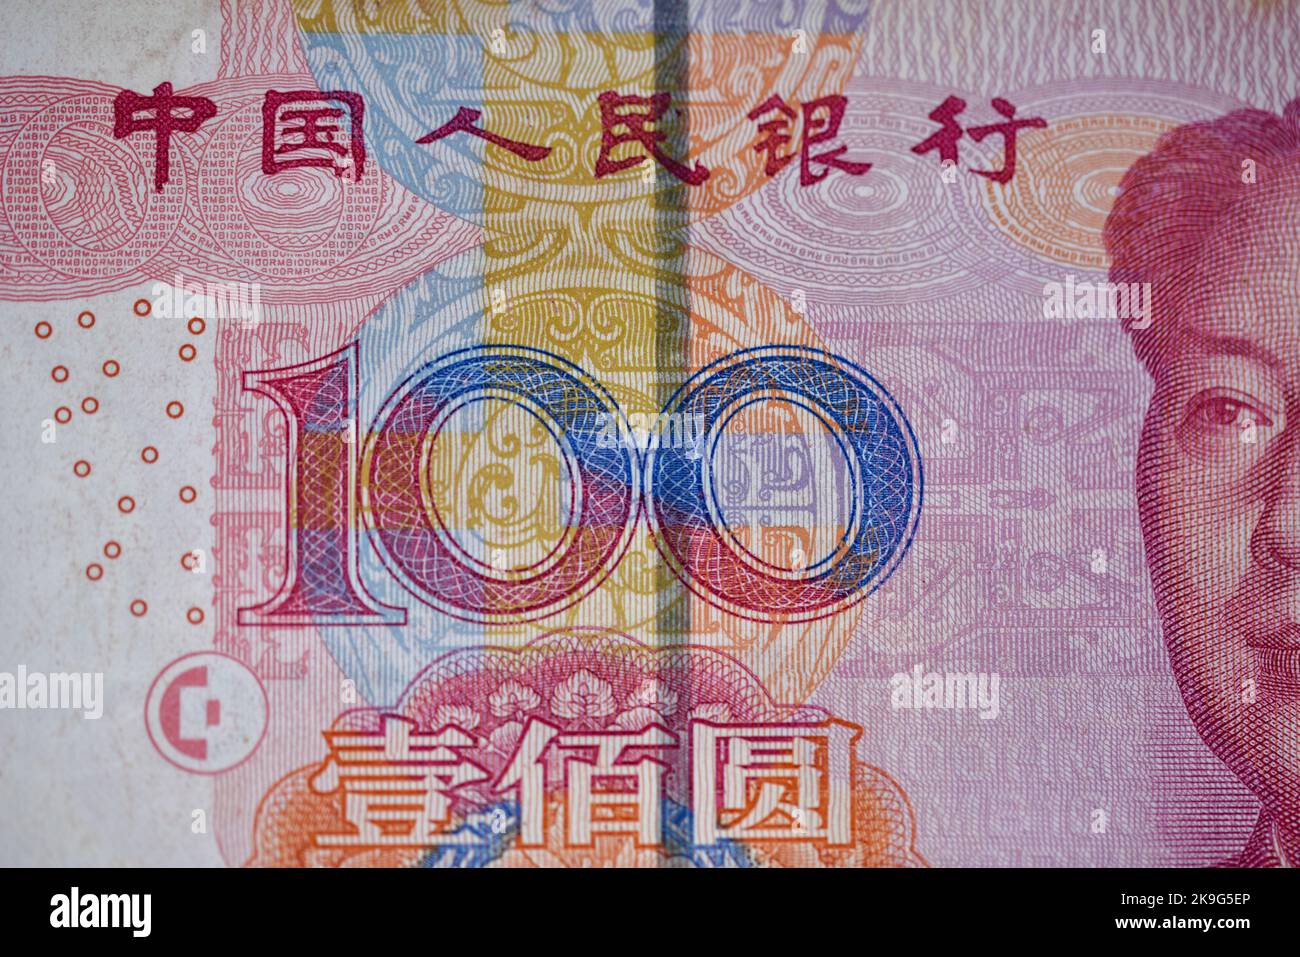 Close up of a Chinese 100 Renmenbi or RMB note, paper currency used on mainland China. Stock Photo